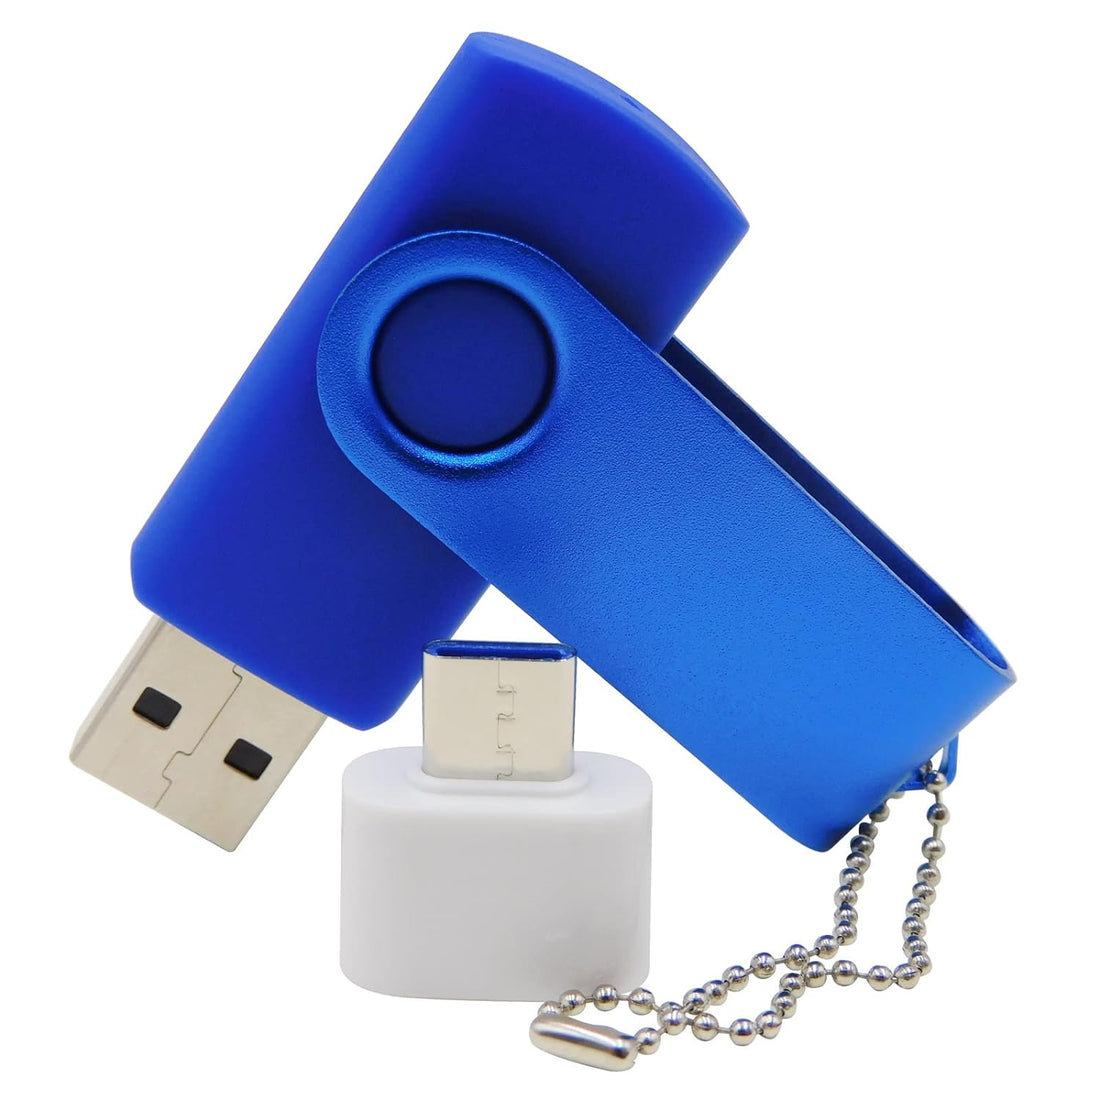 Chauuxee 512MB USB Flash Drives Thumb Drive U Disk PenDrive Memory Sticks for Pupil Student Presents Gifts (Blue)